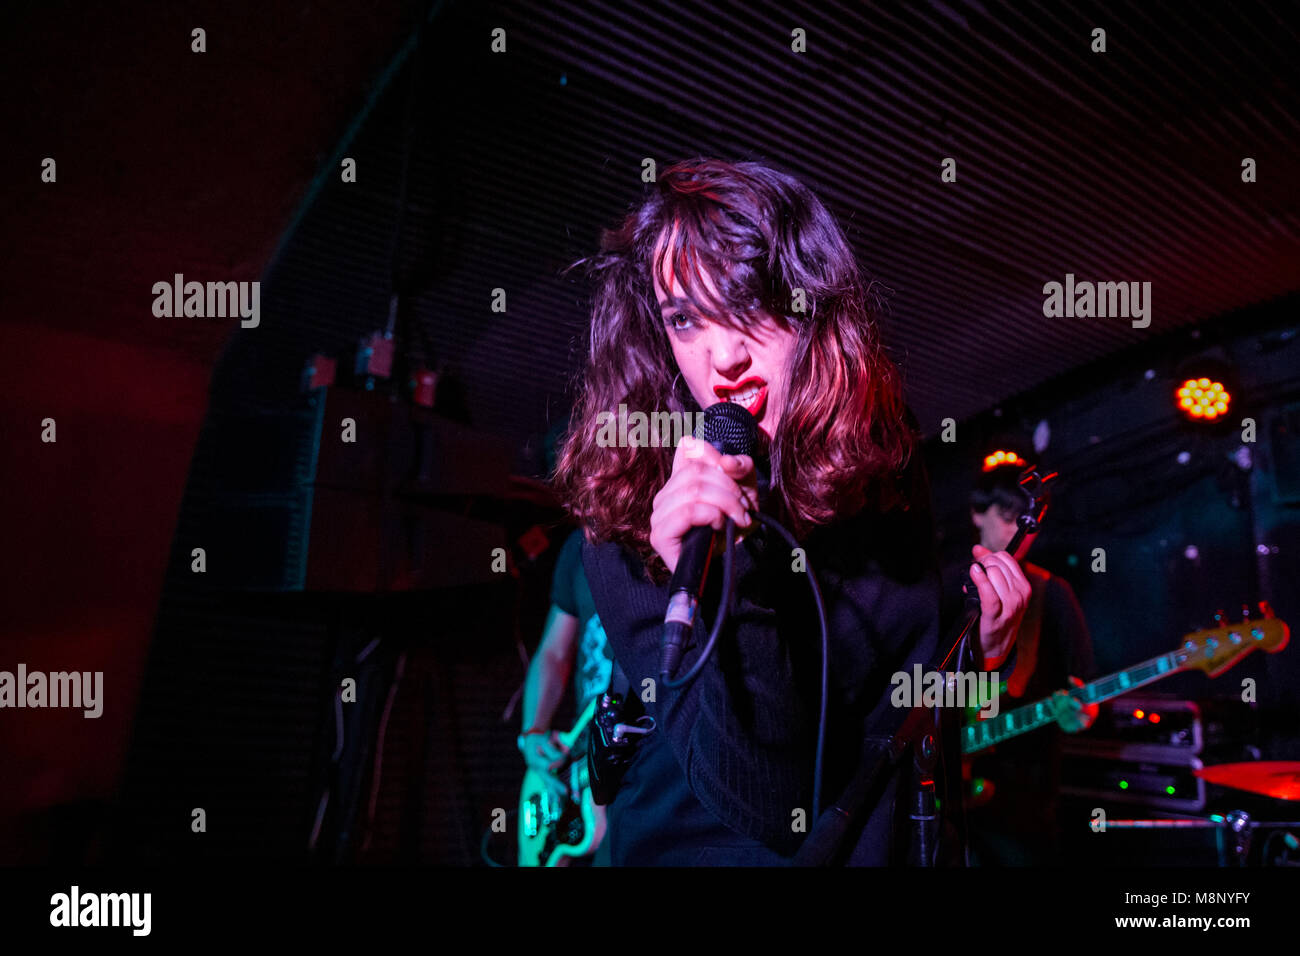 Barcelona, Spain. March 16, 2018. Concert by Agoraphobia in Sidecar organized by Curtcircuit. Photographer: © Aitor Rodero. Stock Photo